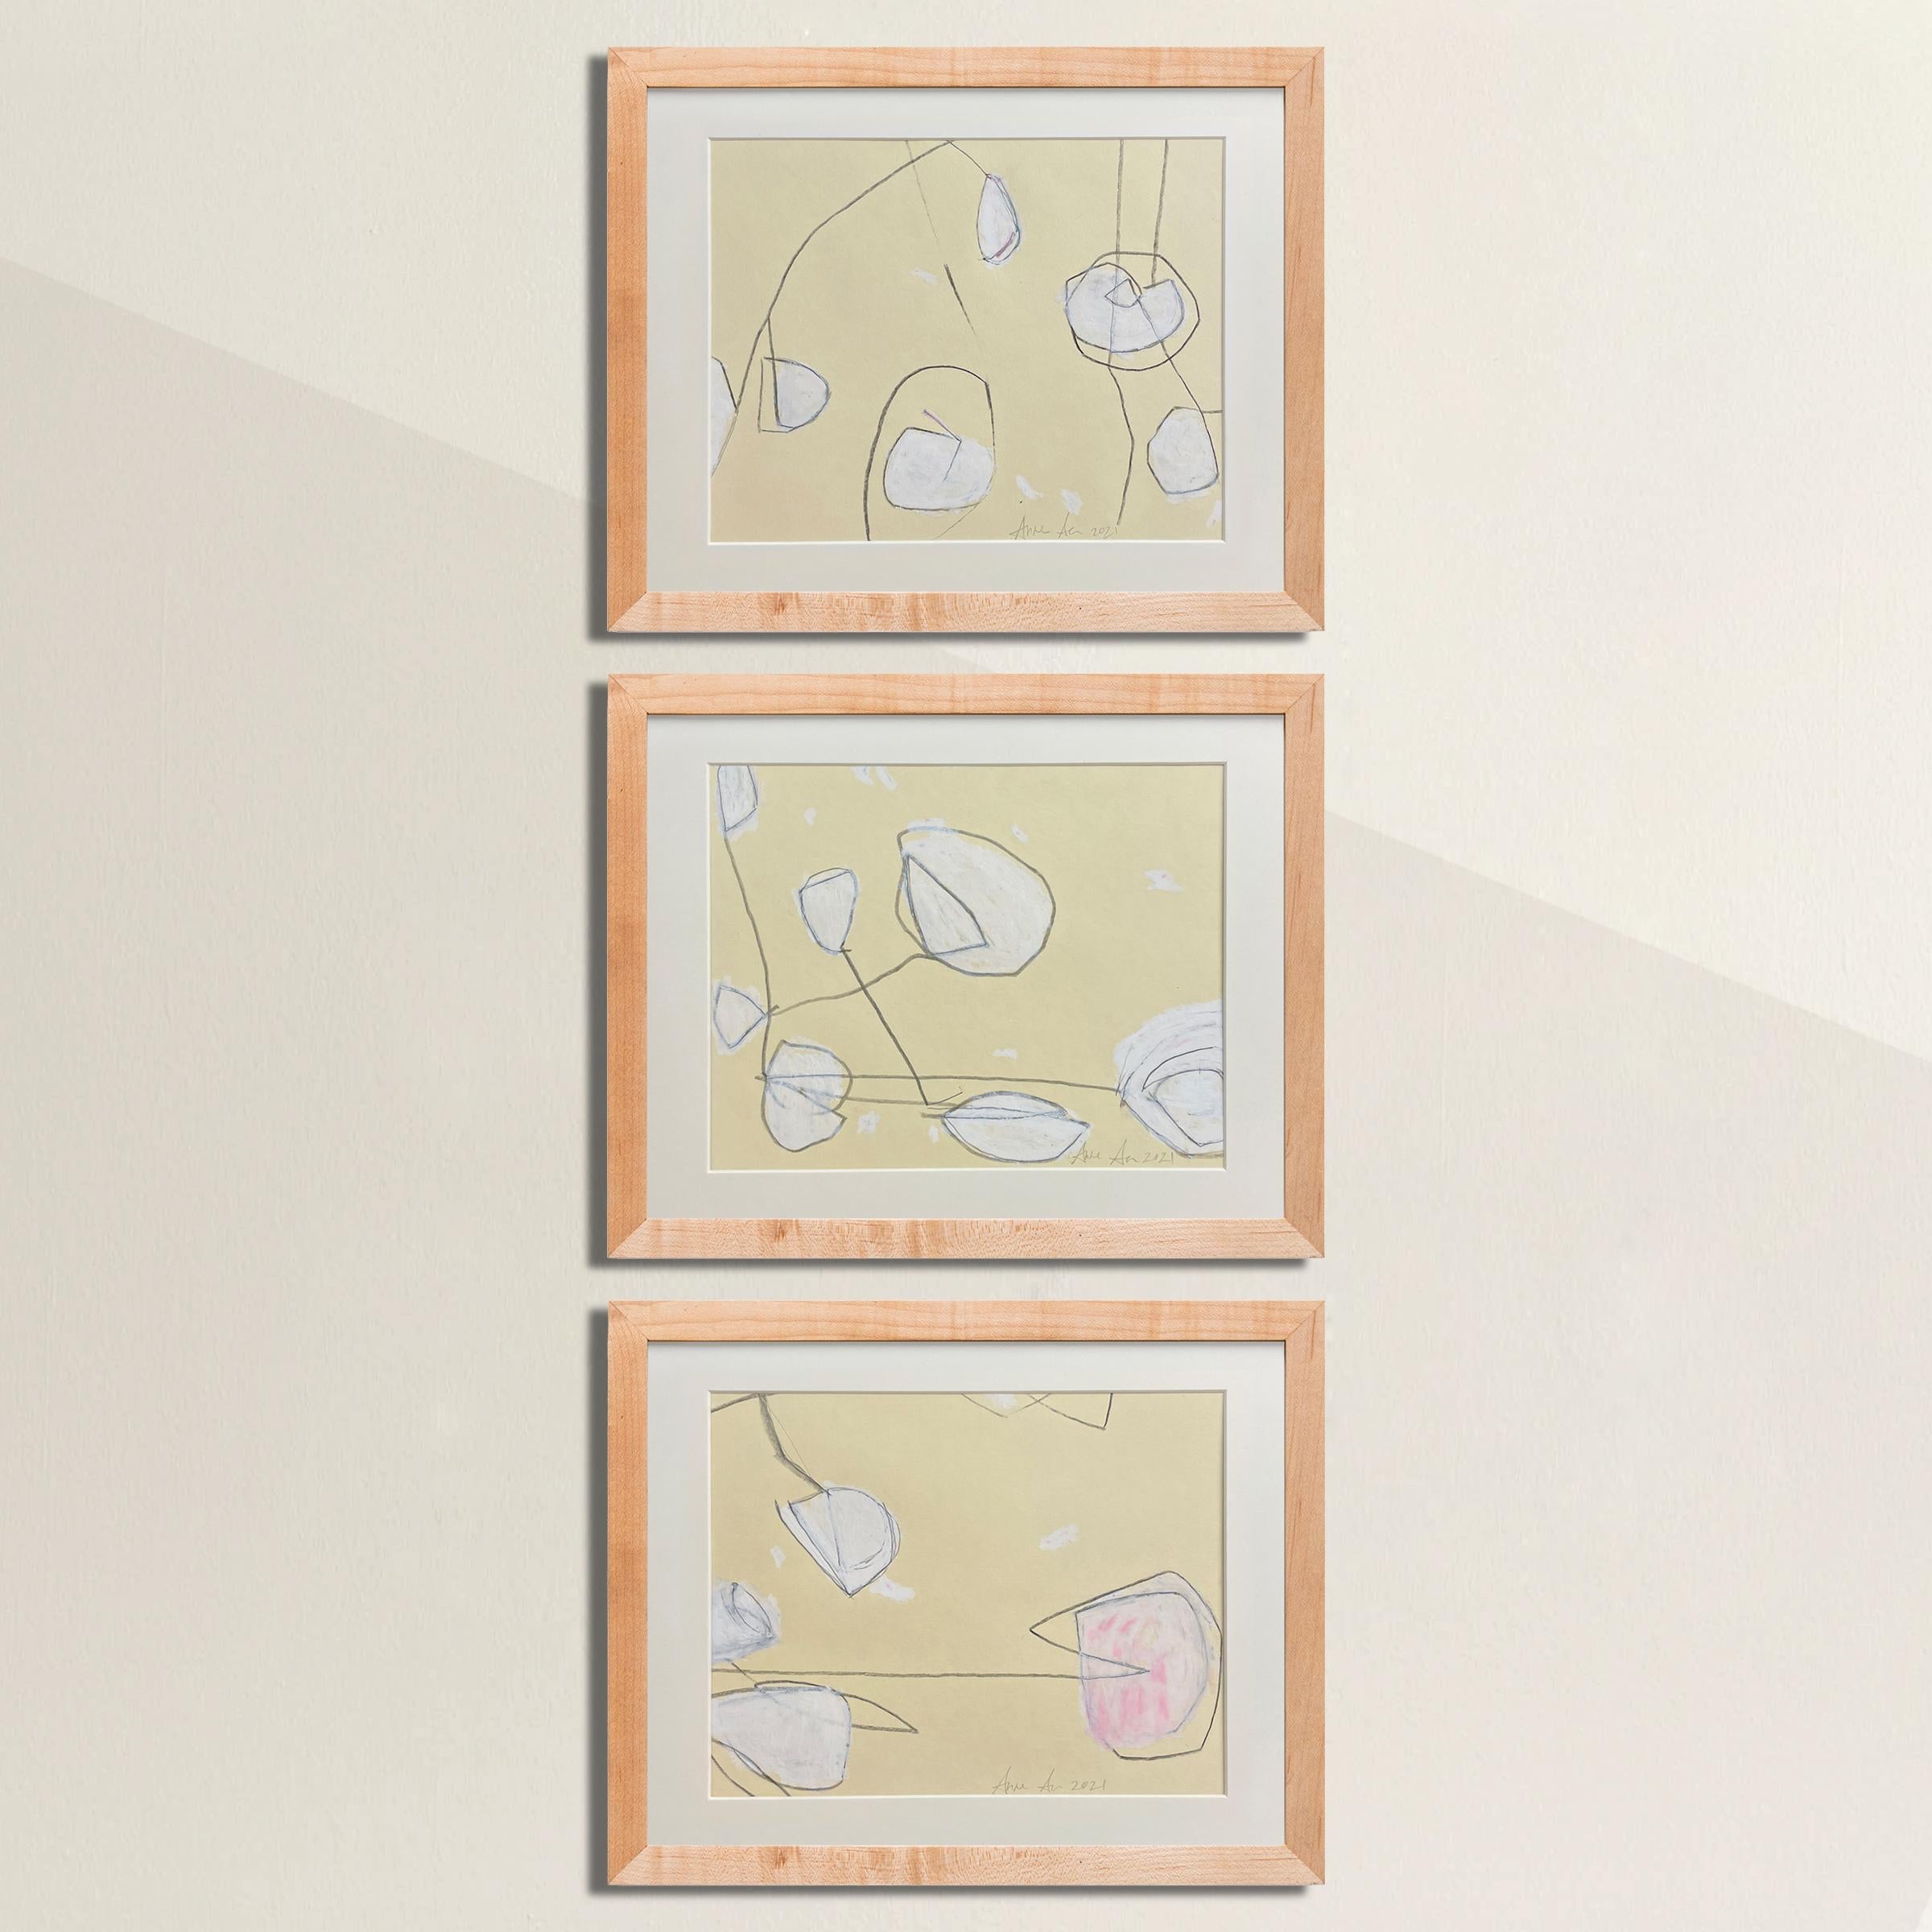 A beautiful set of three framed abstract drawings by artist, Anne Abueva, rendered in conté crayon on paper and framed in simple maple gallery frames.

Interior designer Anne Abueva made the decision ten years ago to put down the paint fan deck